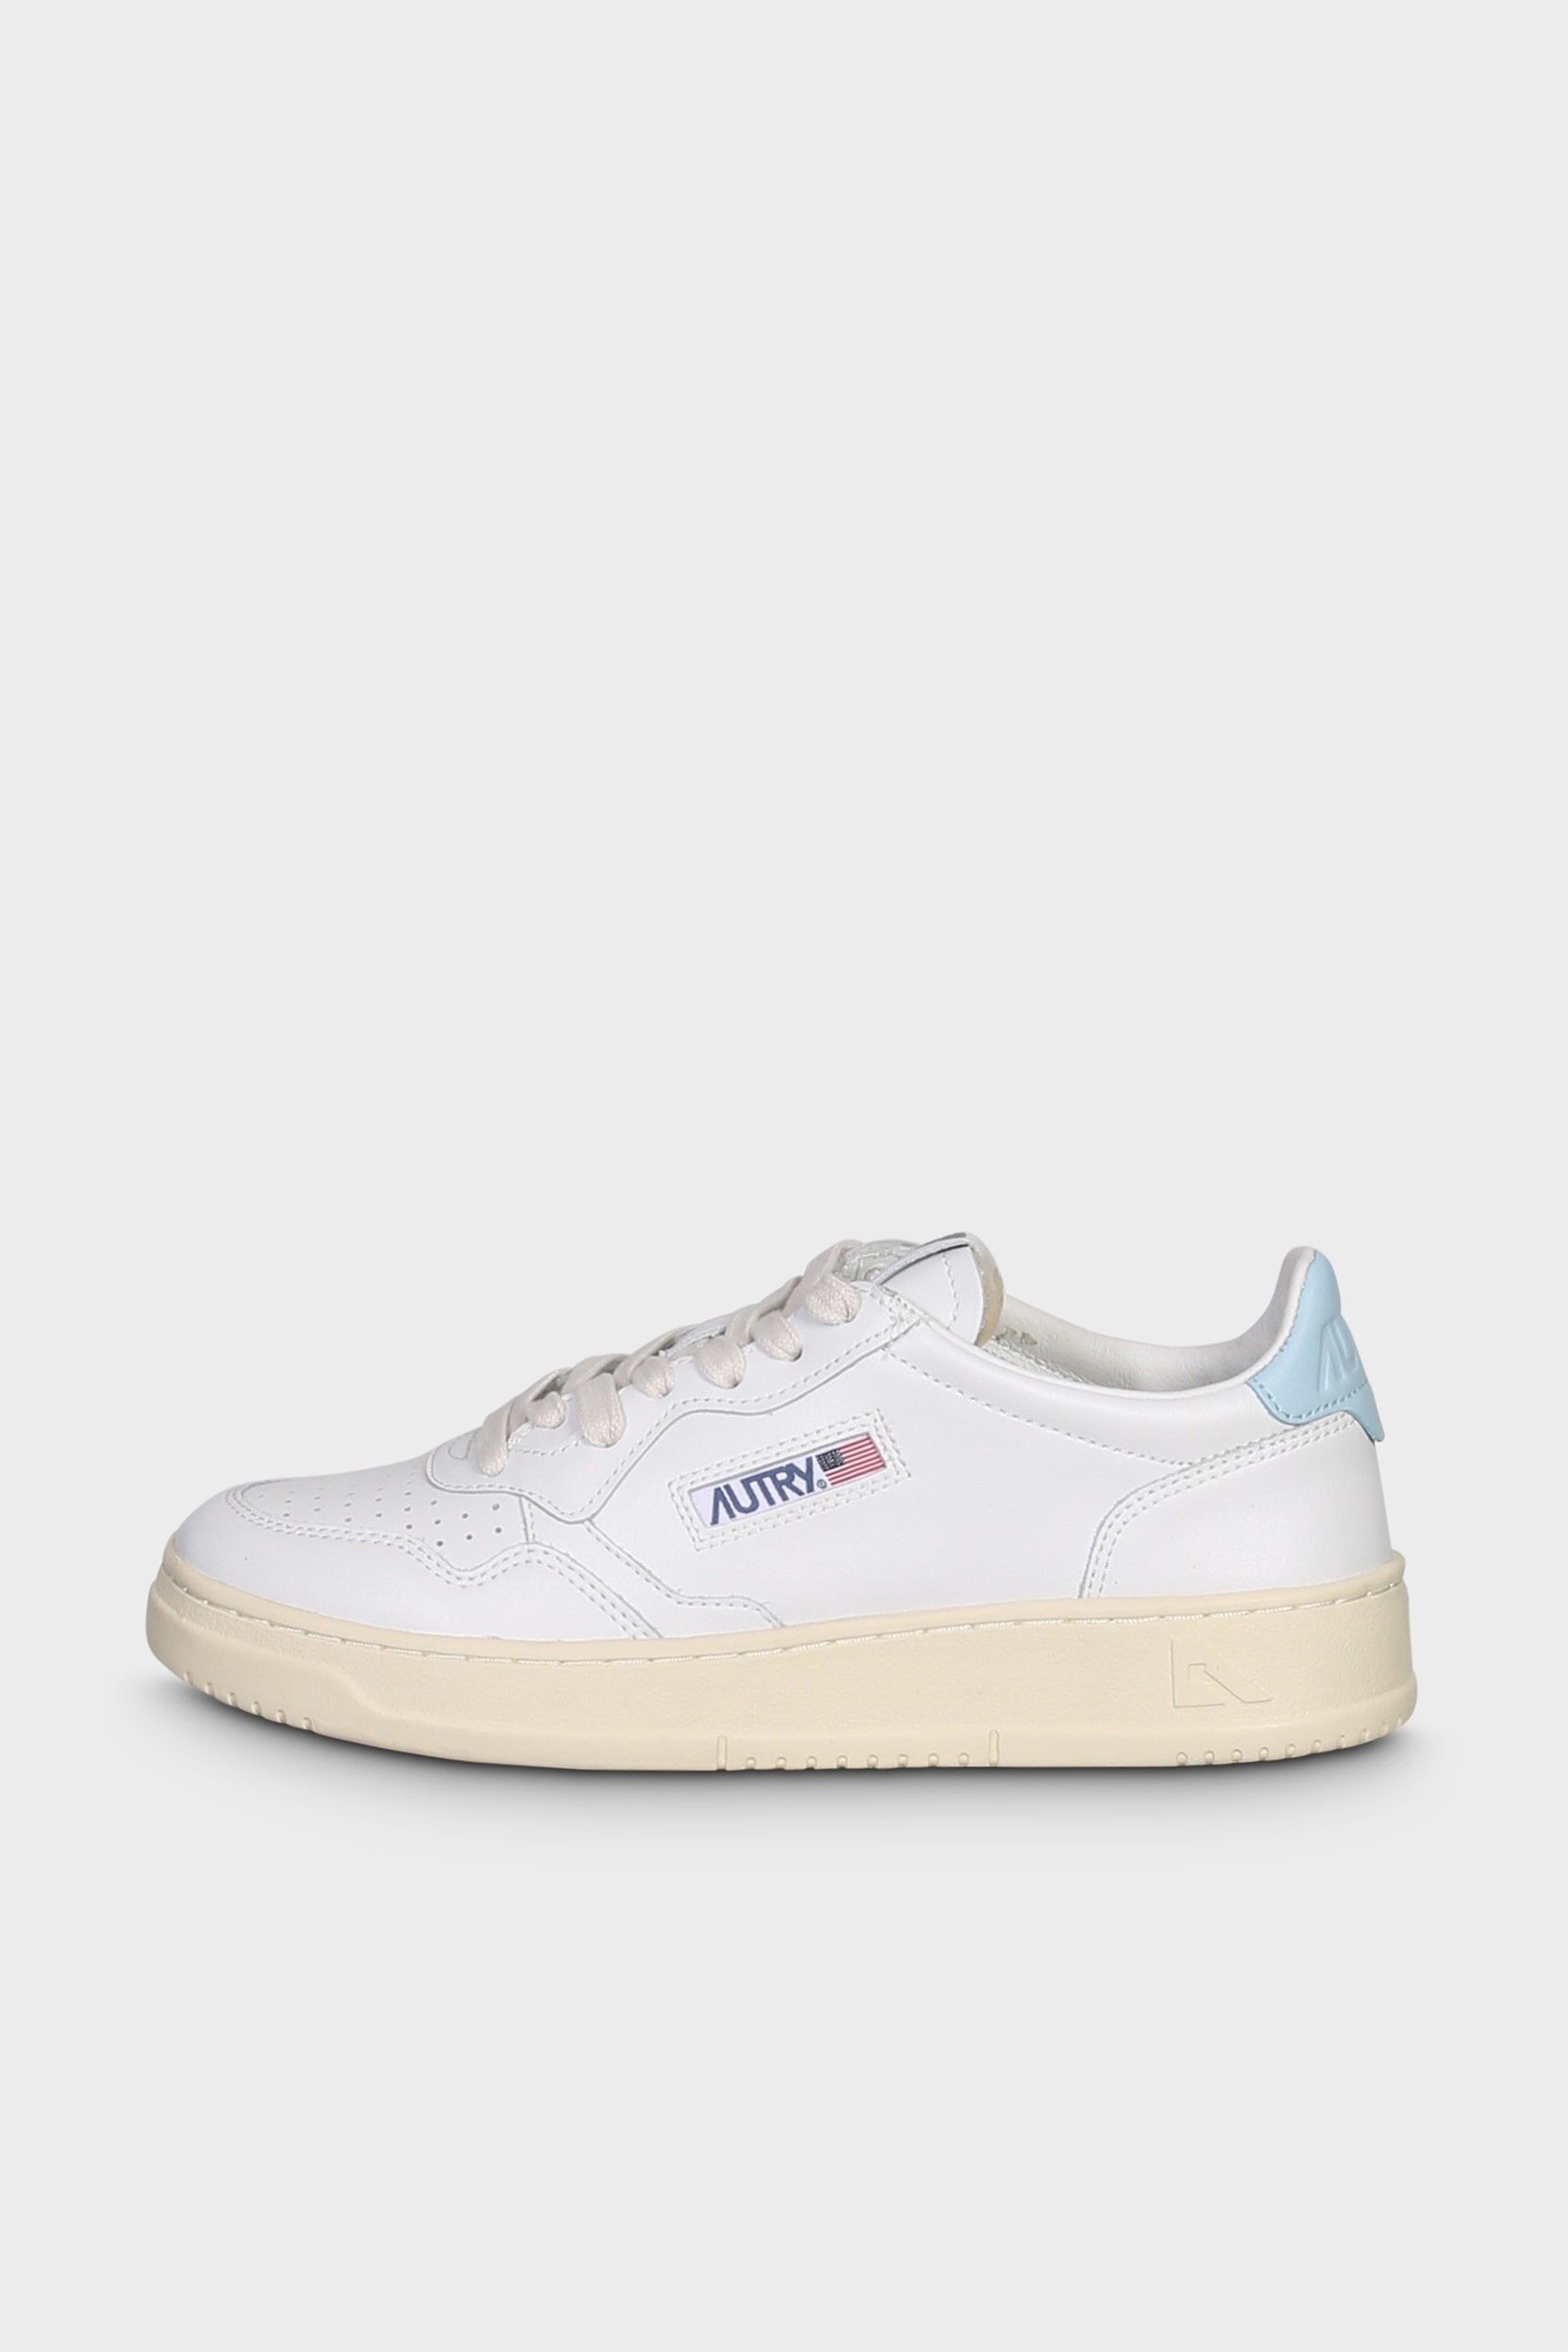 AUTRY ACTION SHOES Medalist Low Sneaker White/Stream Blue